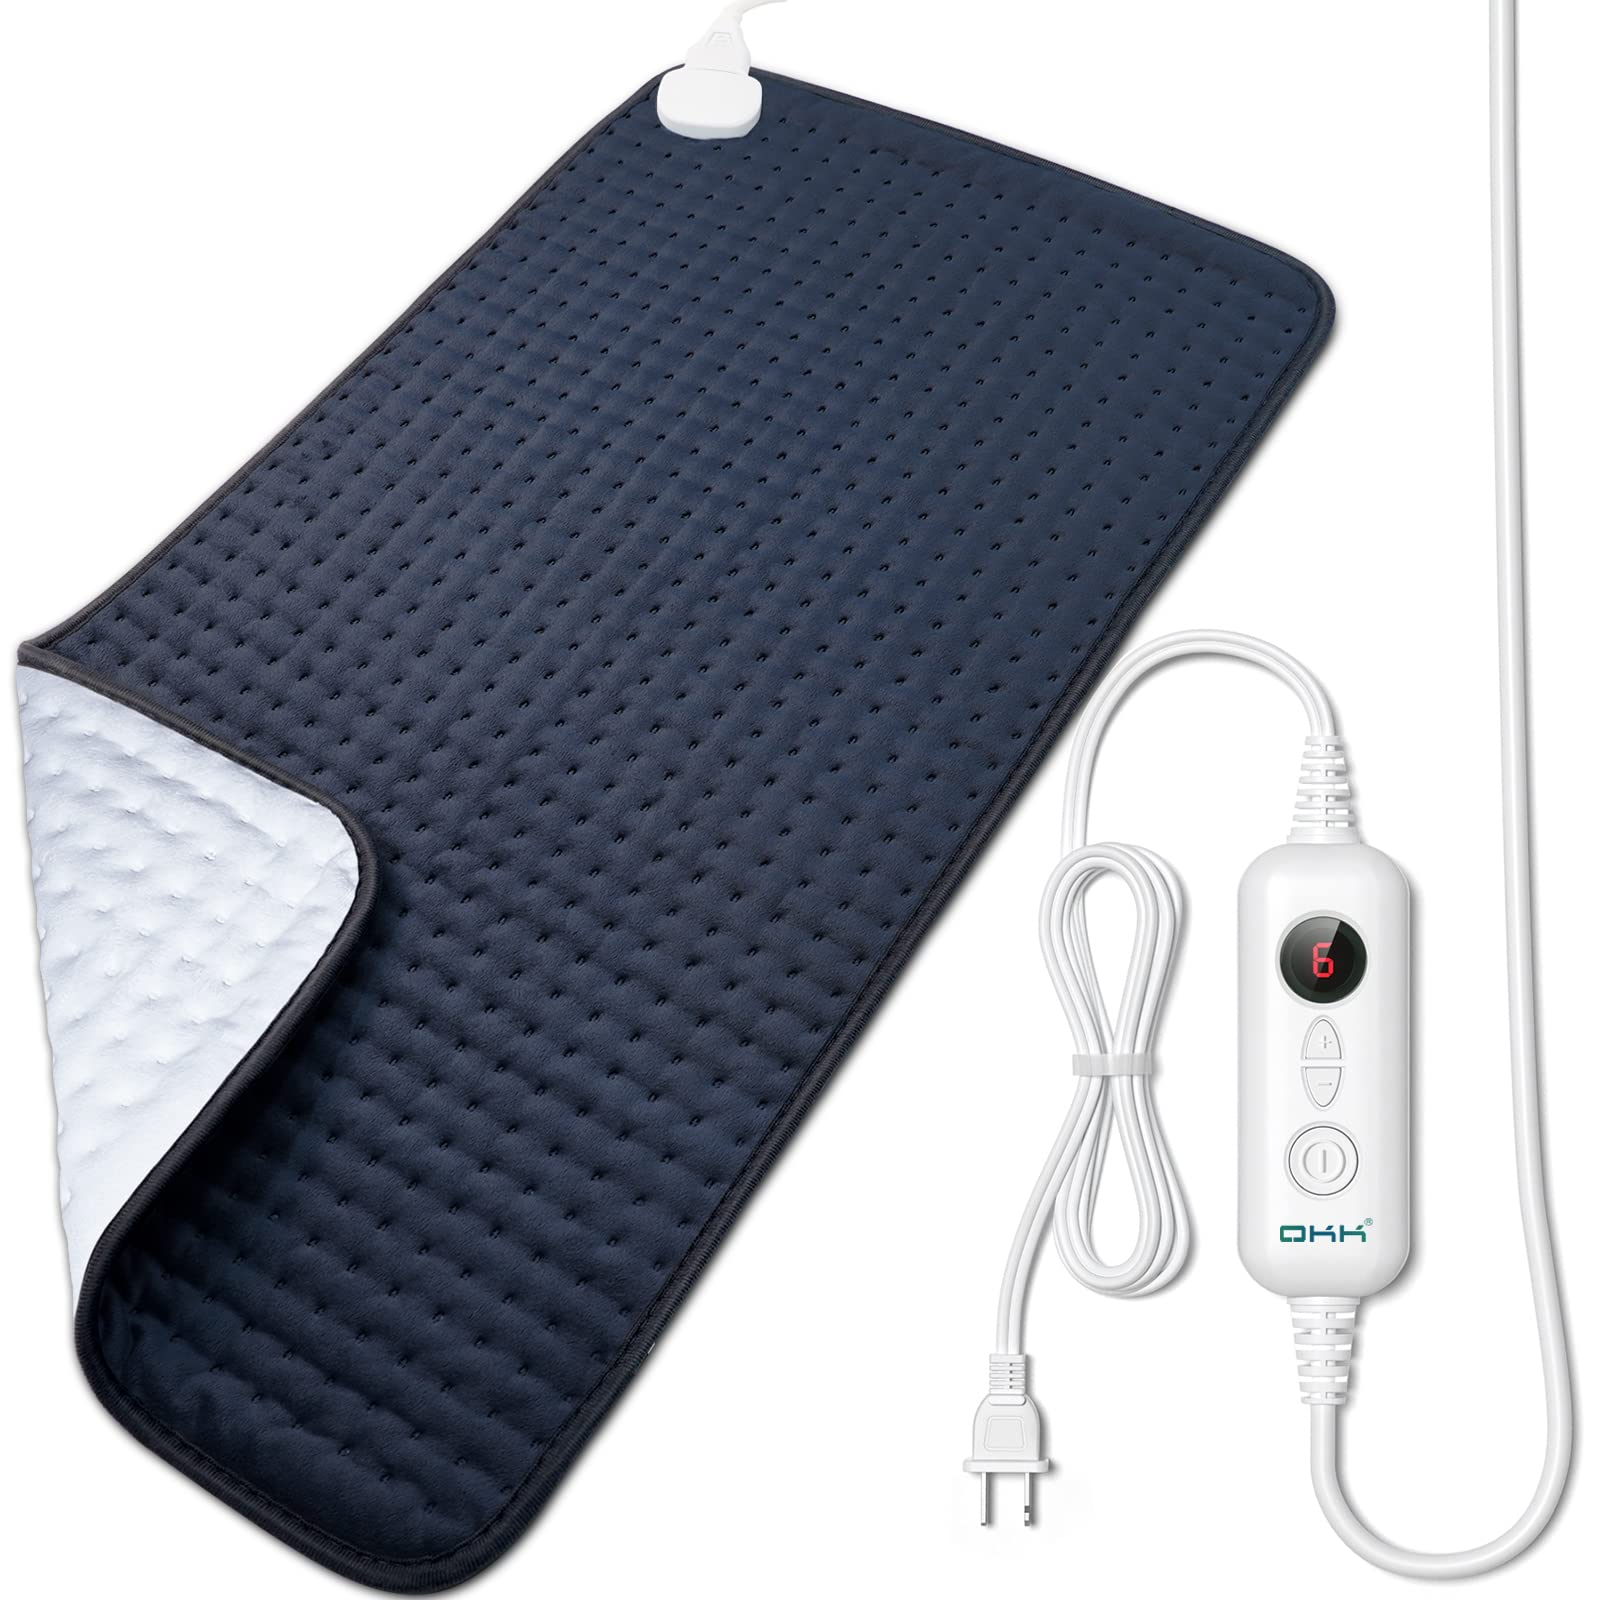 Heating Pad for Back Pain Relief, OKK 33